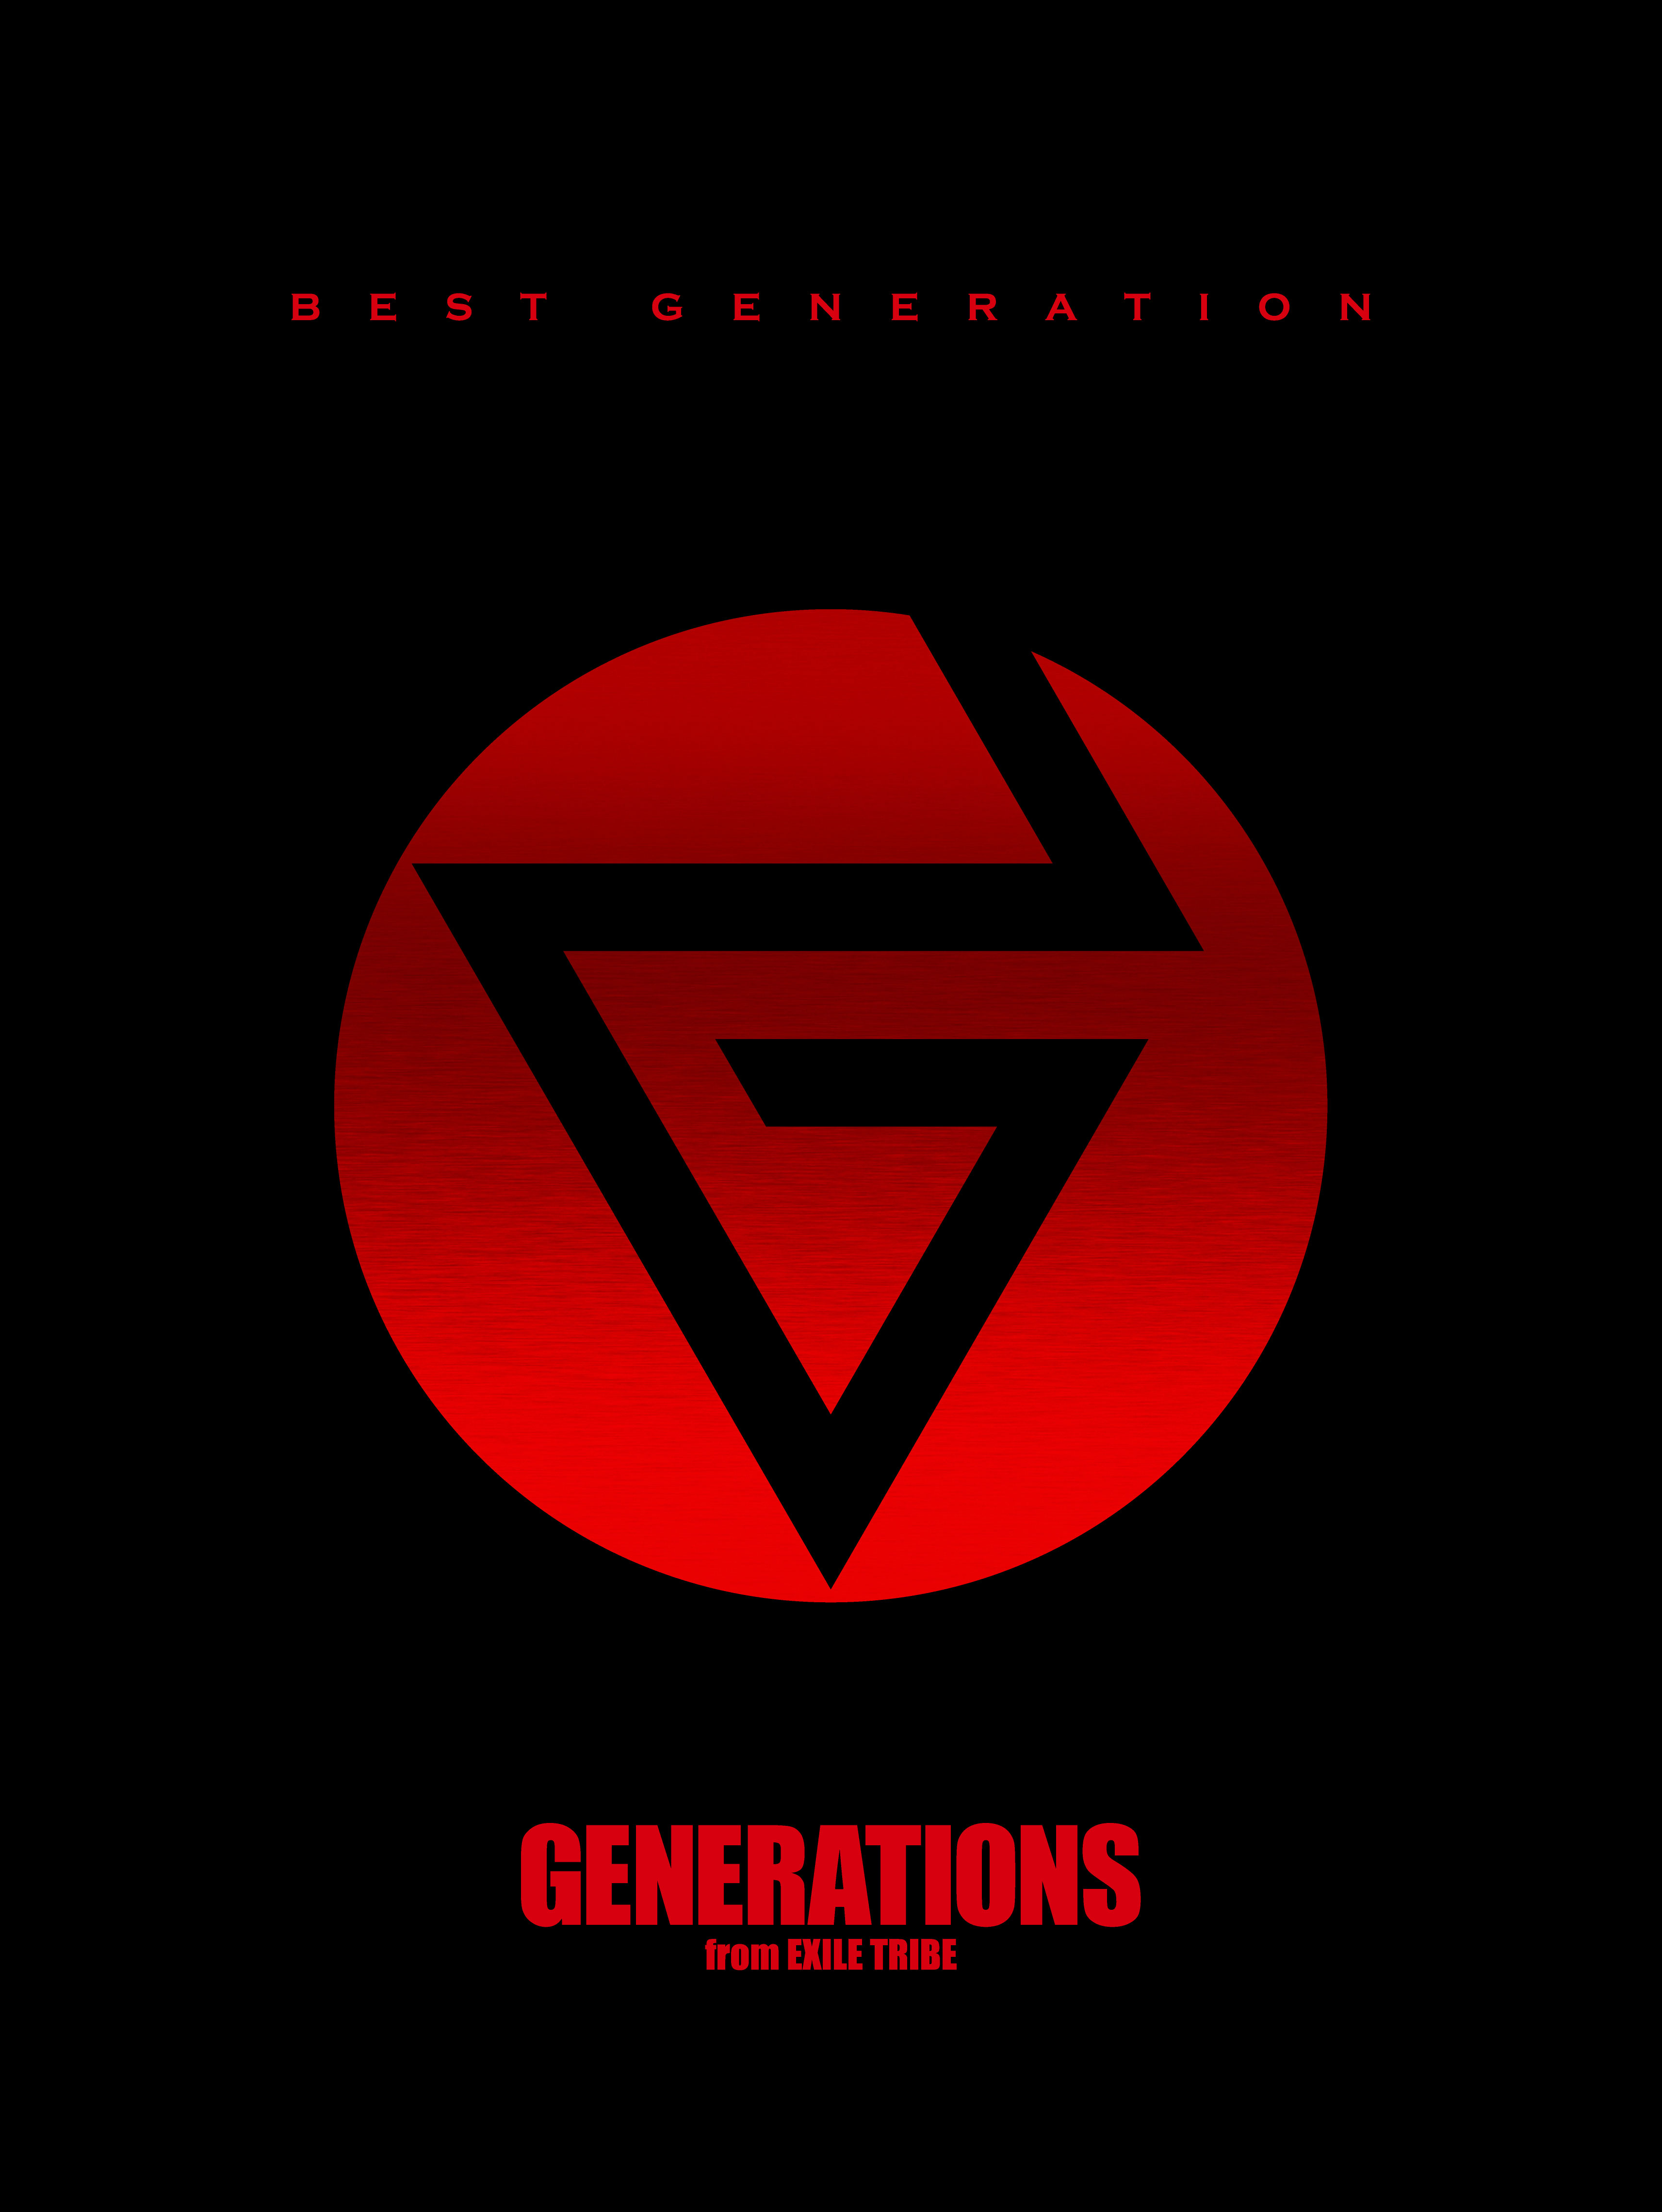 『BEST GENERATION』GENERATIONS from EXILE TRIBE